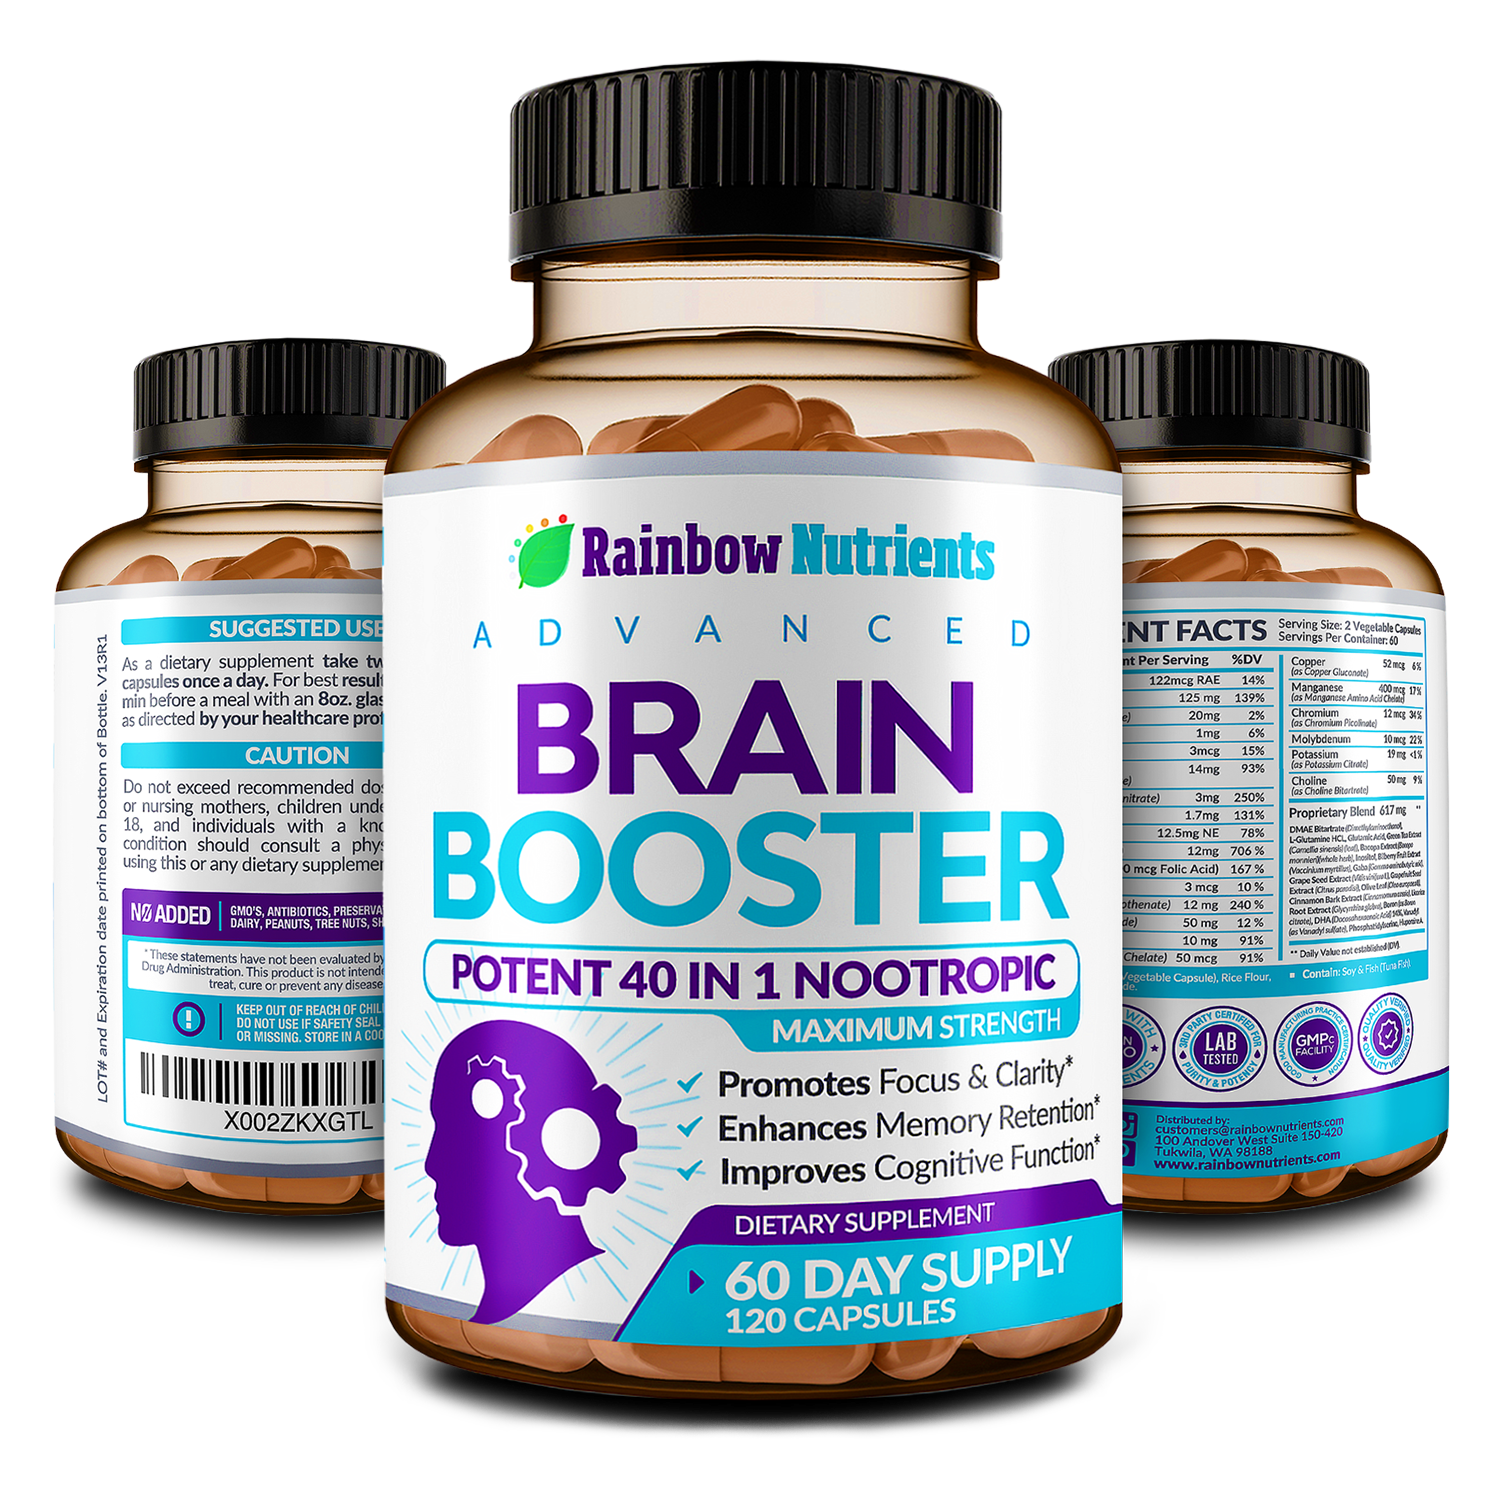 Brain Booster bottle from all sides